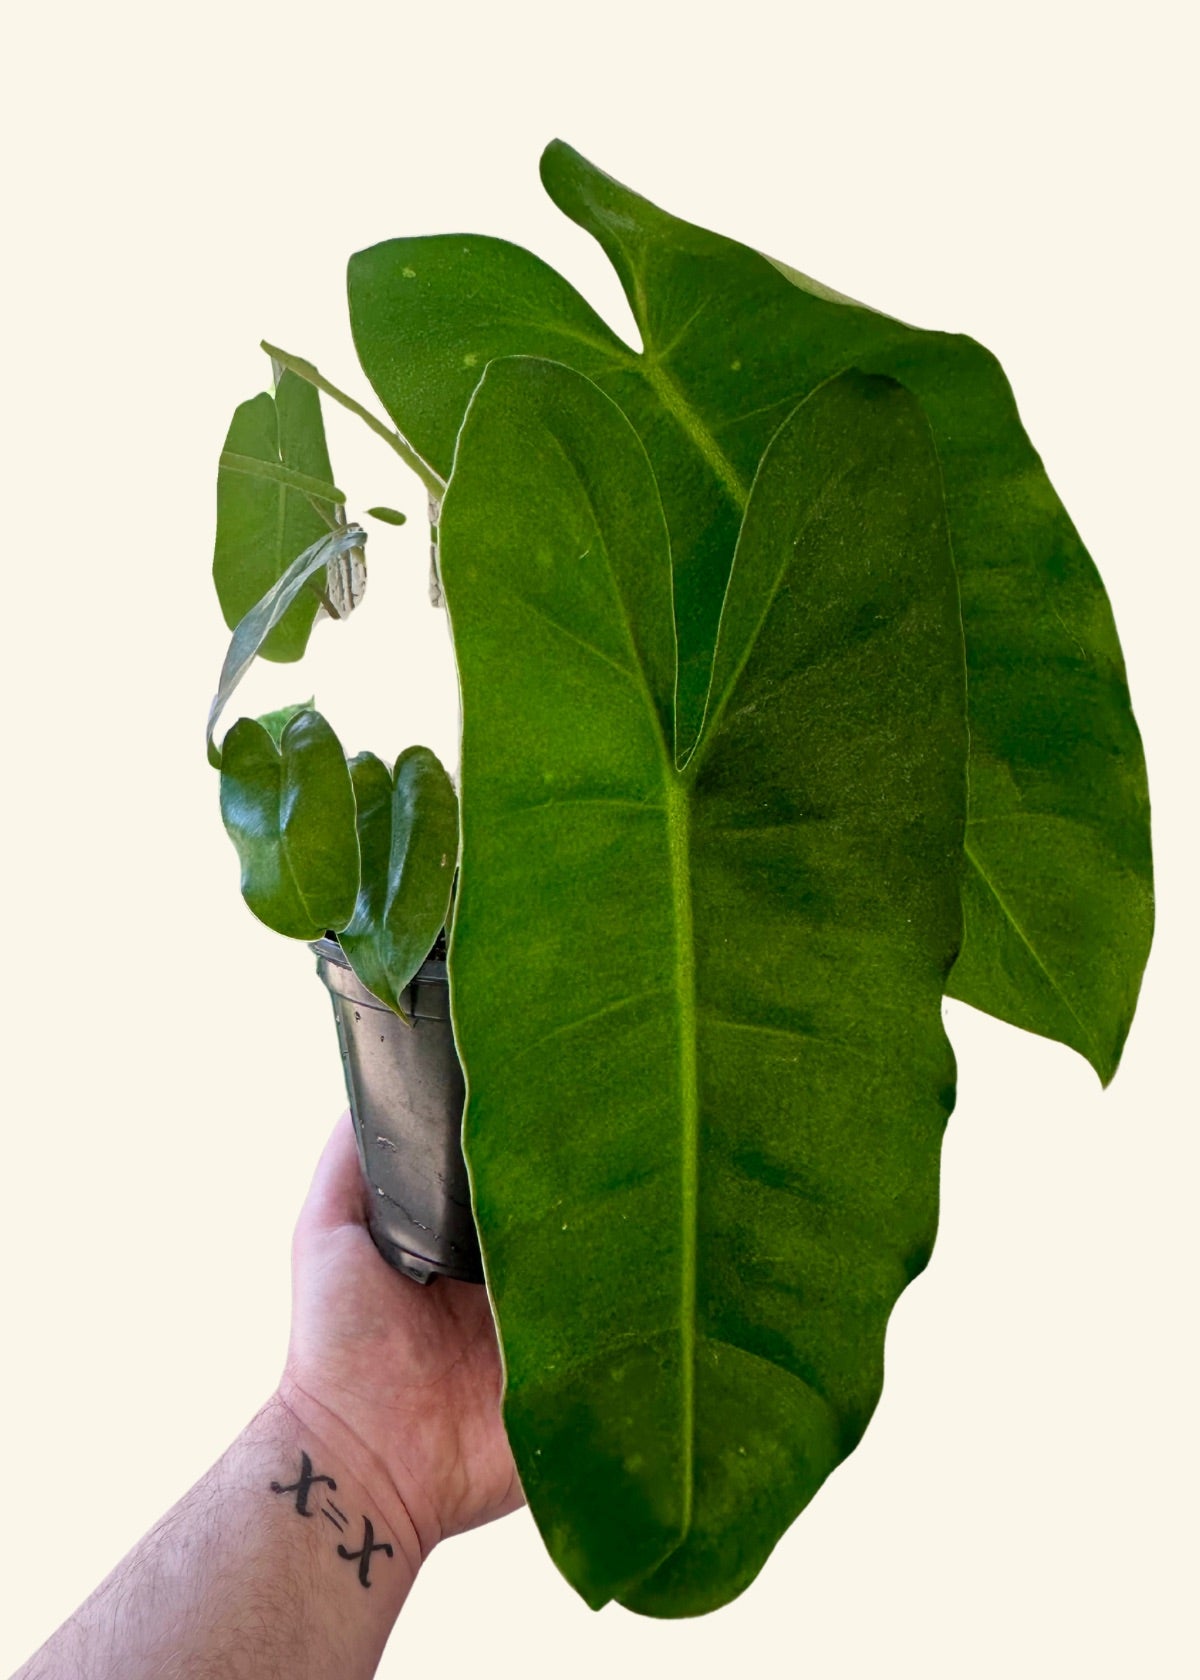 6” Philodendron ‘Burle Marx’